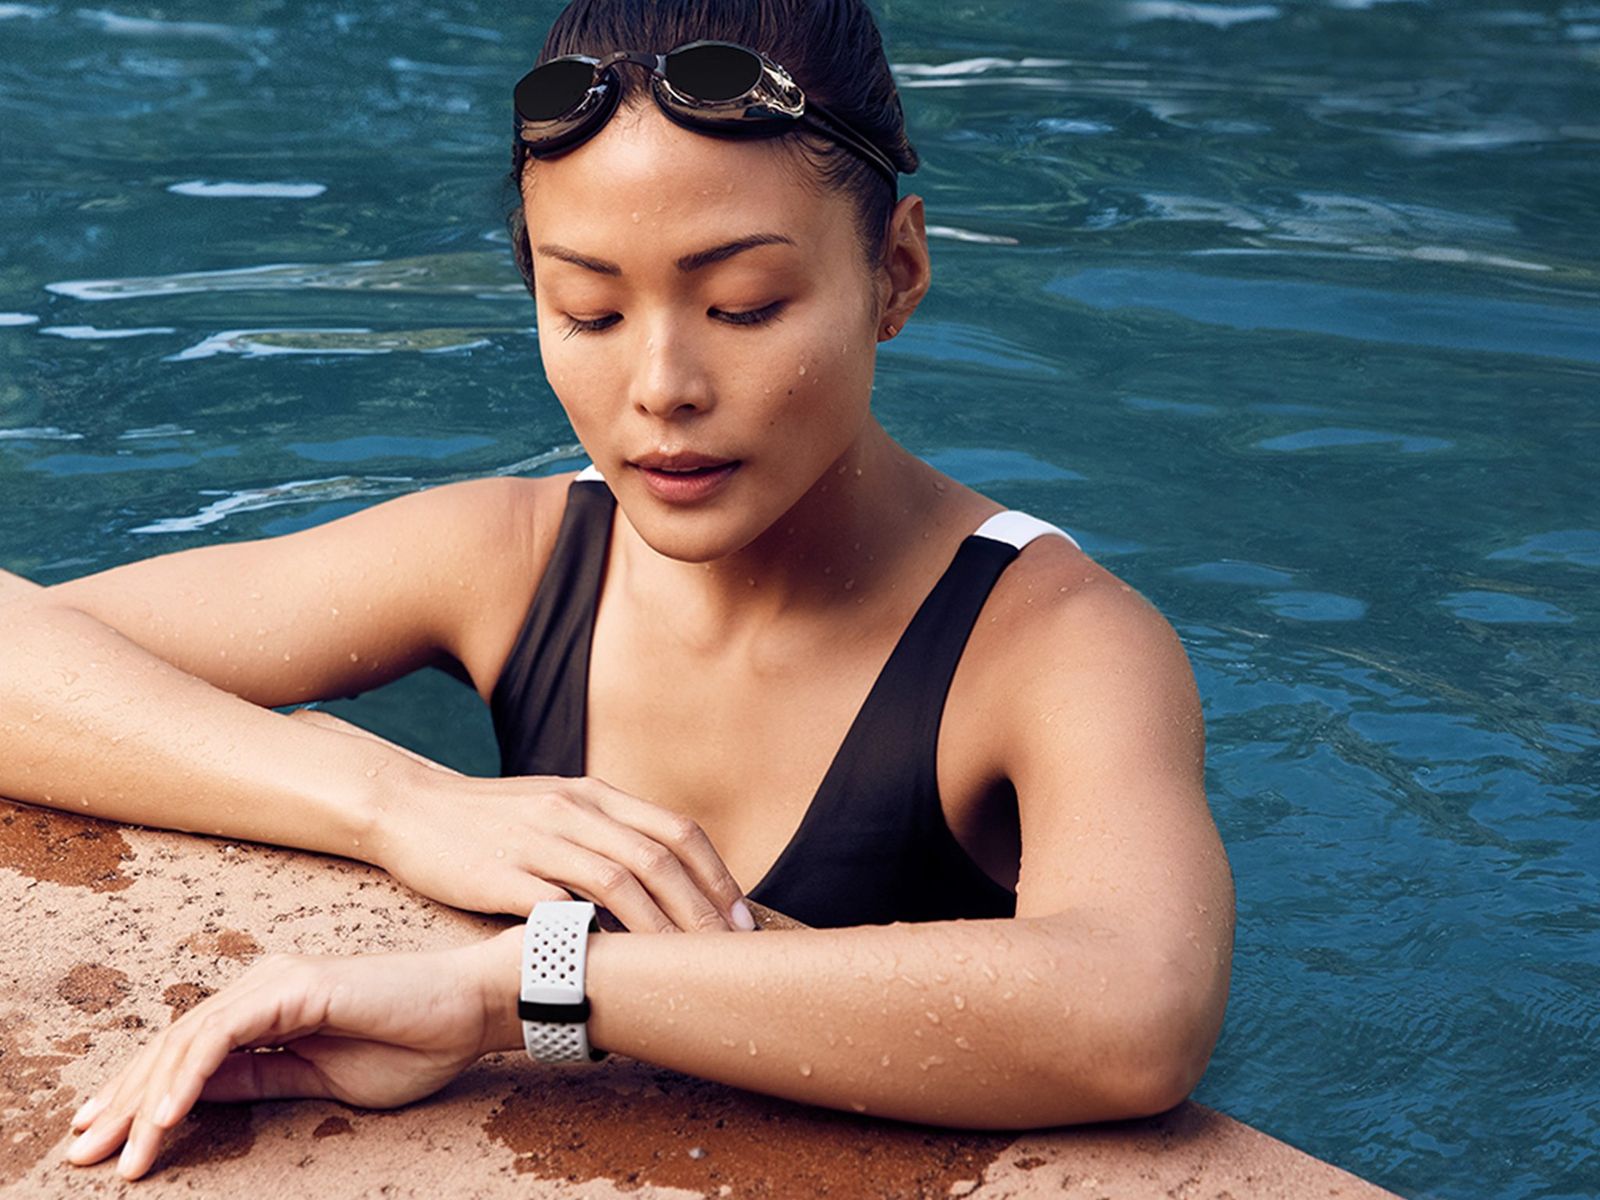 fitbit for swim tracking